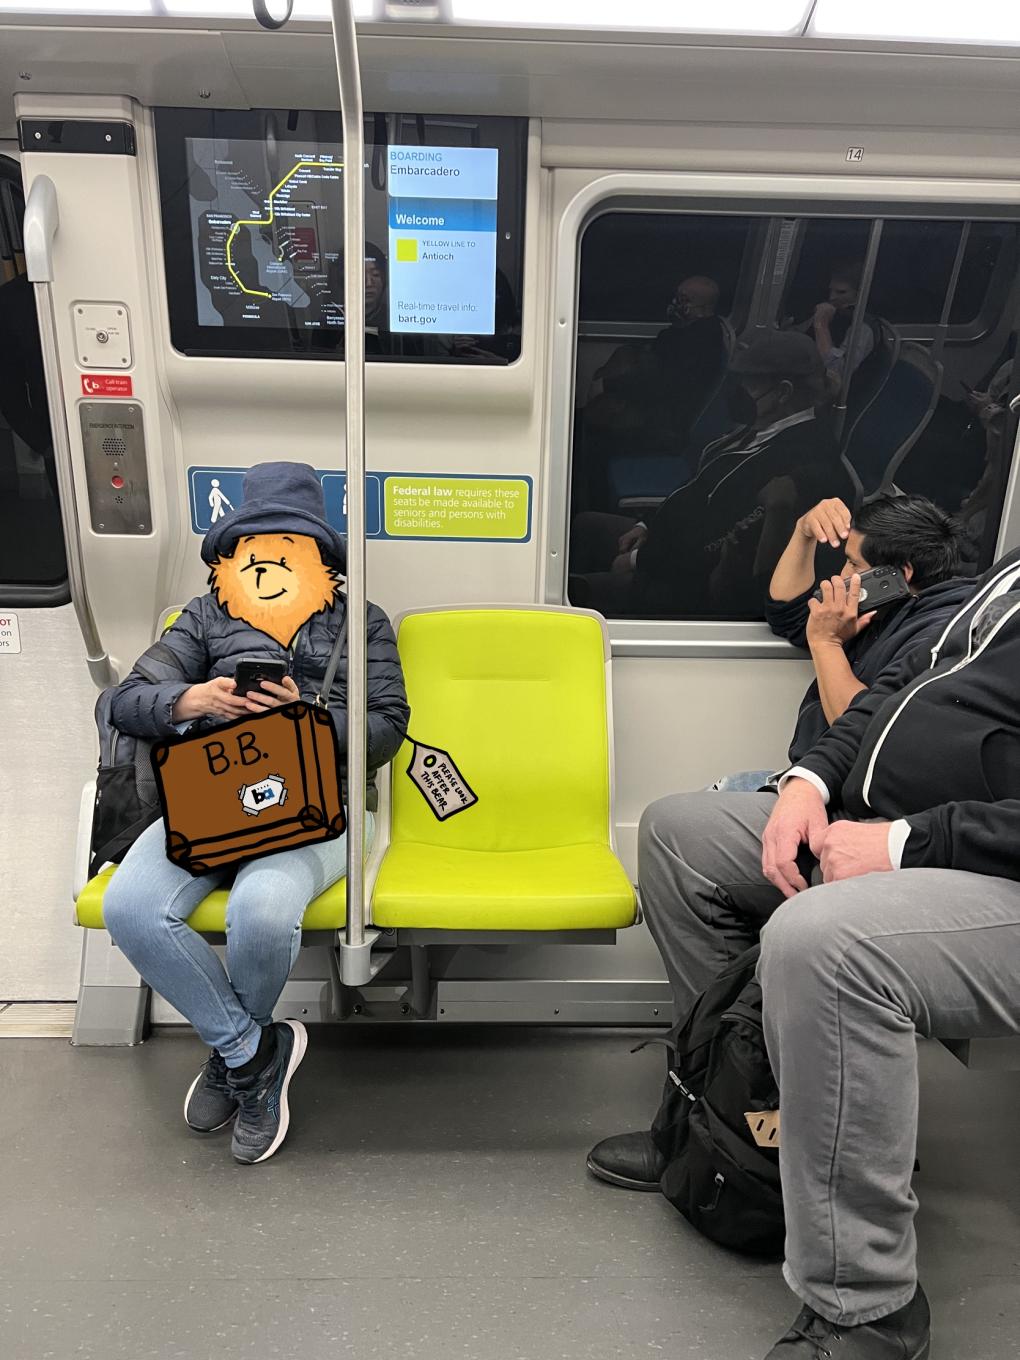 A scene on a BART train with a person sitting in a green seat with a Paddington Bear illustration over their head